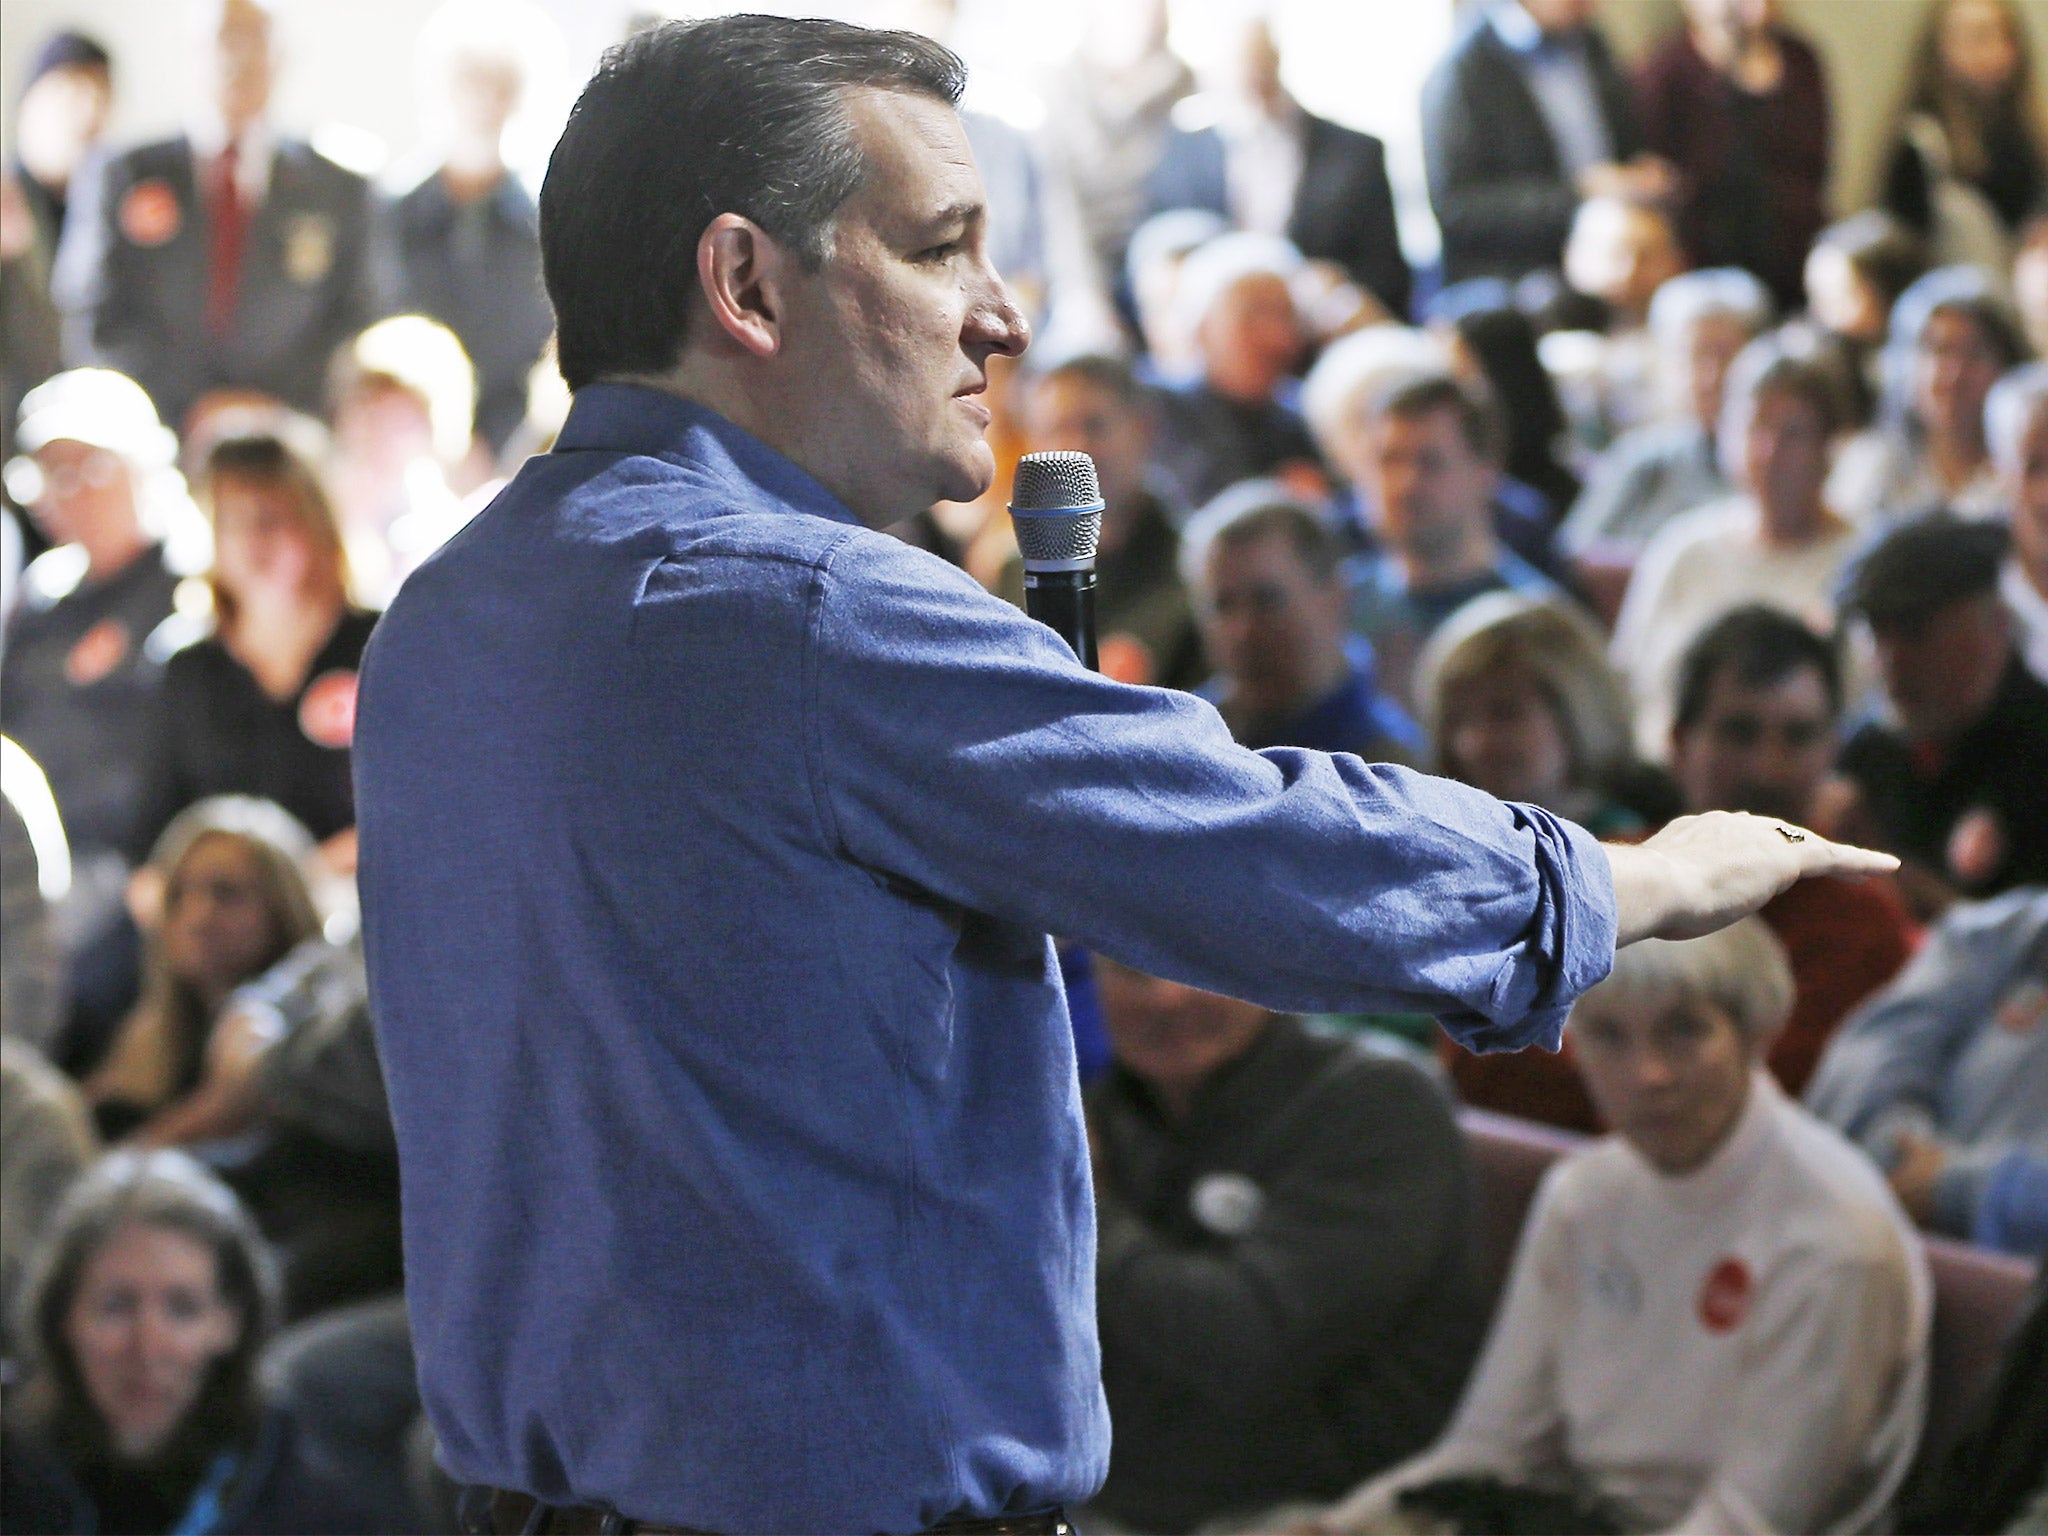 'I will fight day and night to return the land to you, its citizens', says Mr Cruz